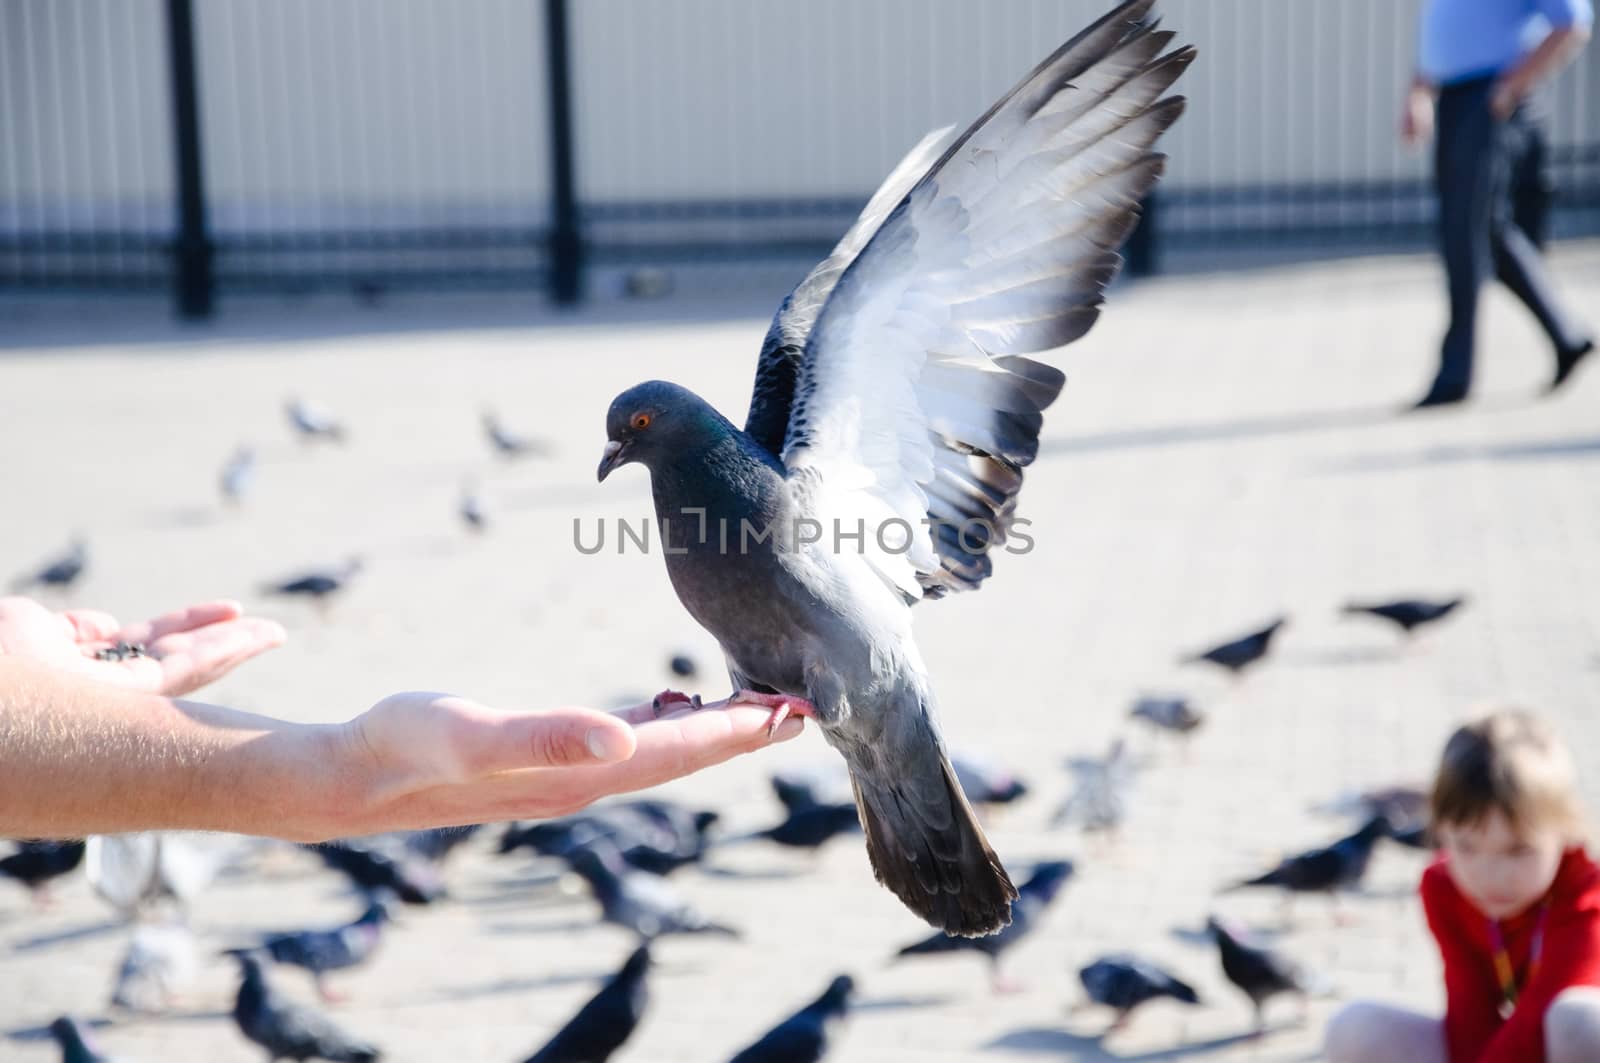 Pigeon sitting on the hand with stretched wings close-up, Sergie by Eagle2308